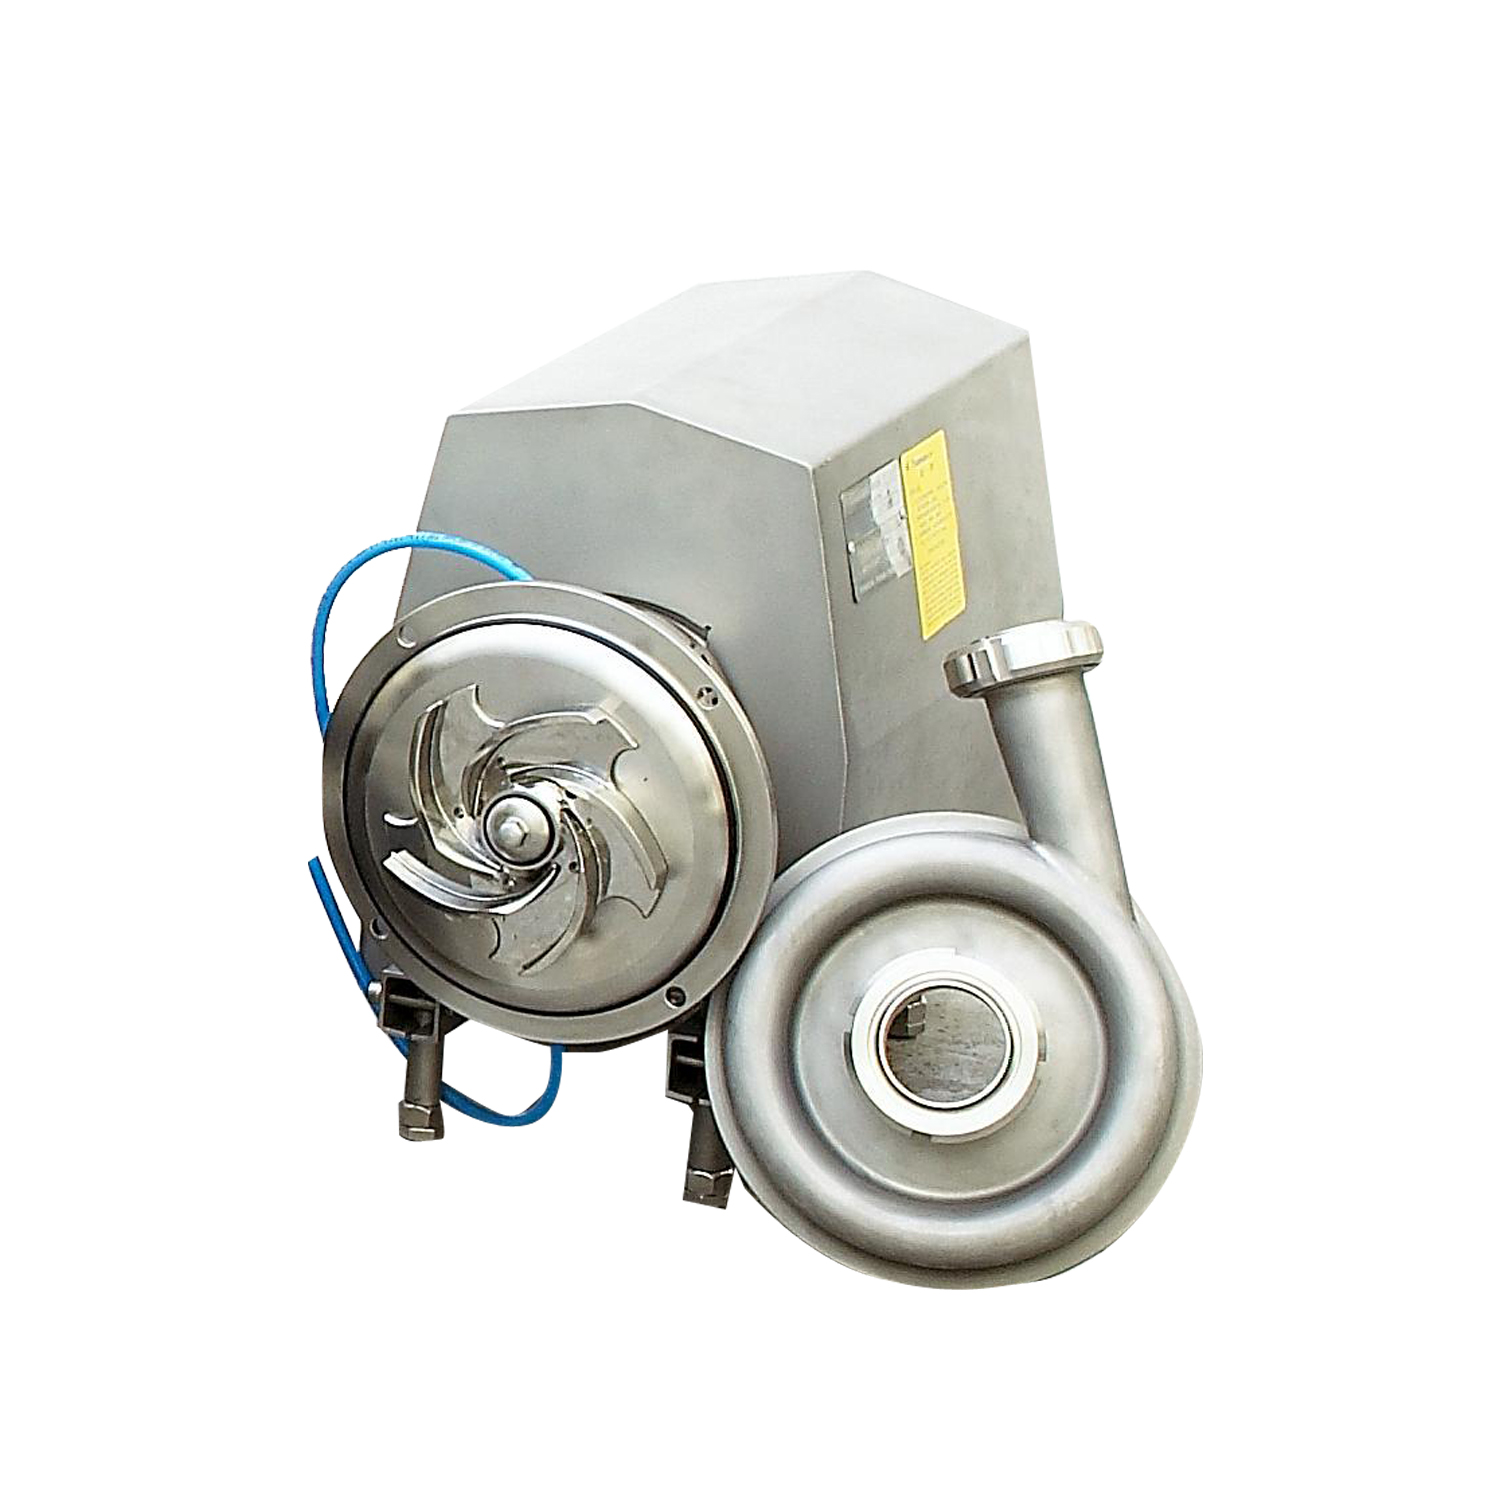 Stainless Steel High Suction Head 0.55kw-22kw Triclover Connection Wine Transfer Pump for Dairy